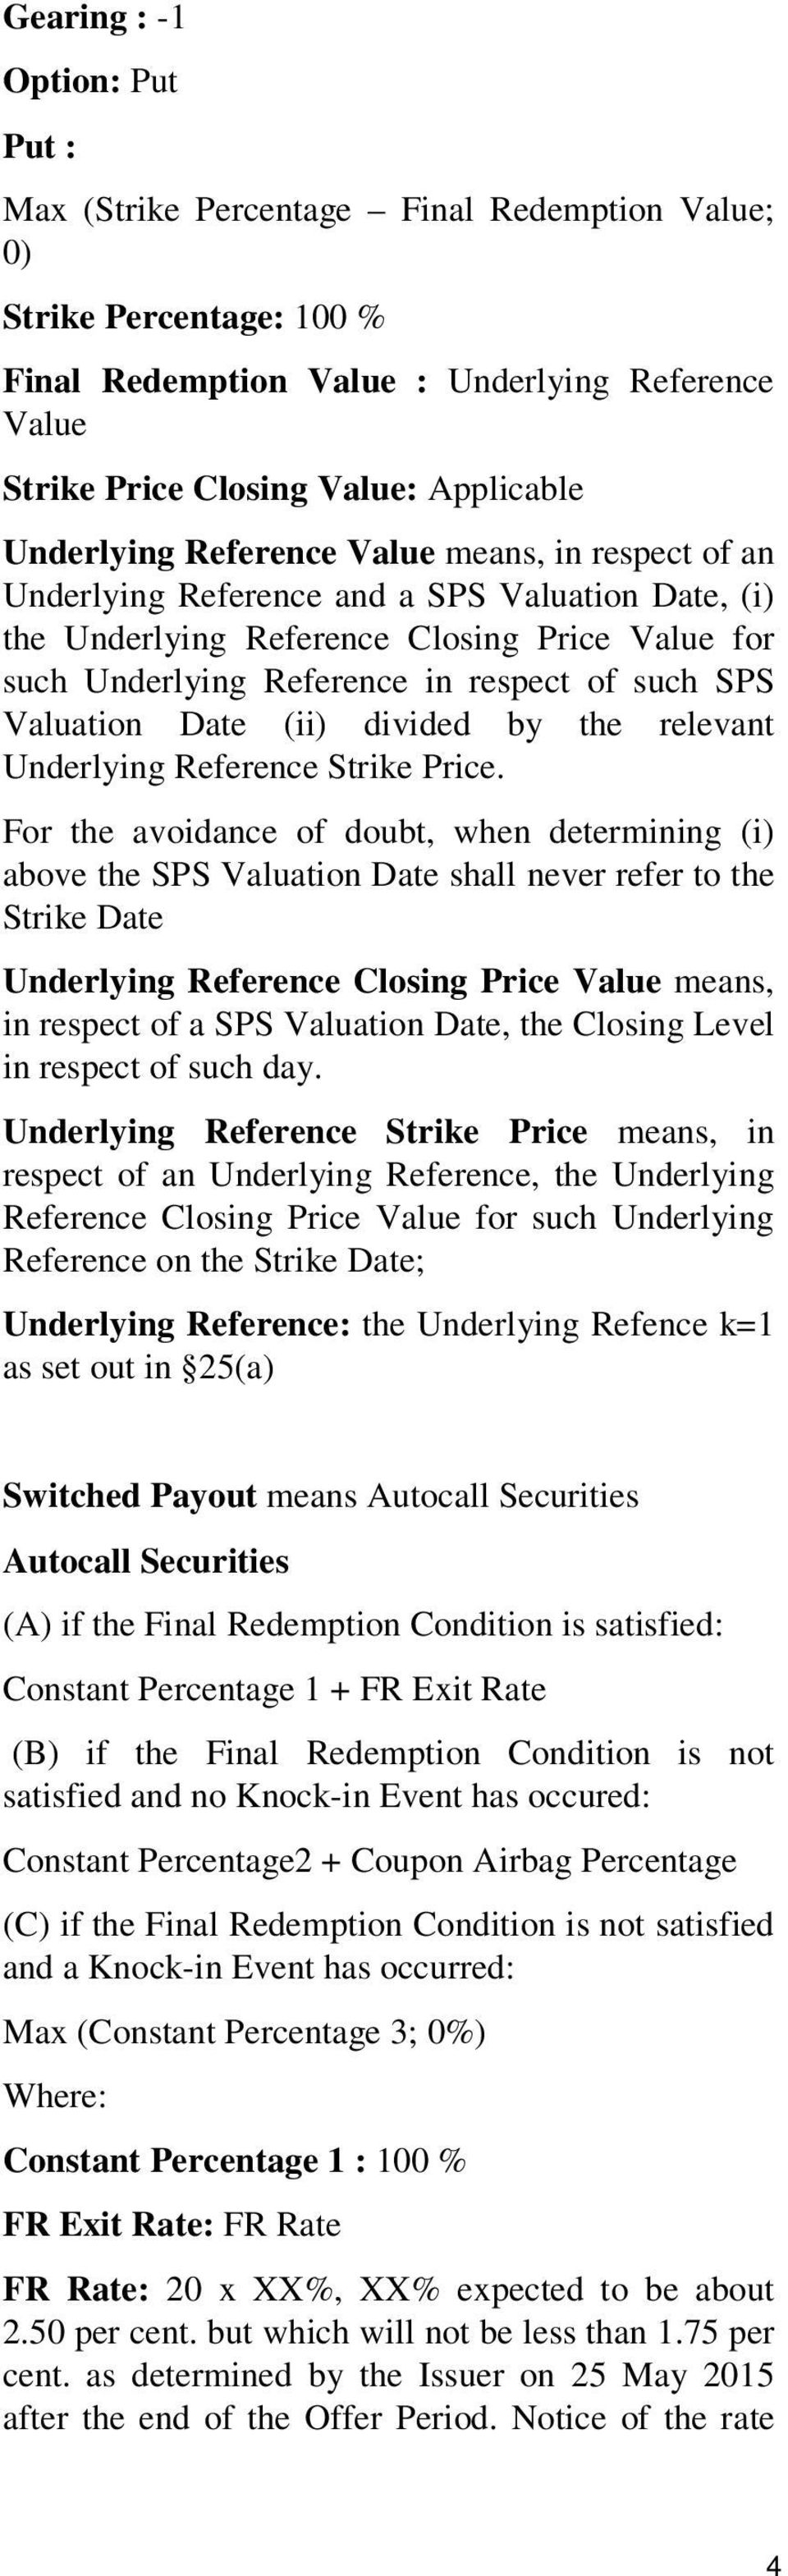 Valuation Date (ii) divided by the relevant Underlying Reference Strike Price.